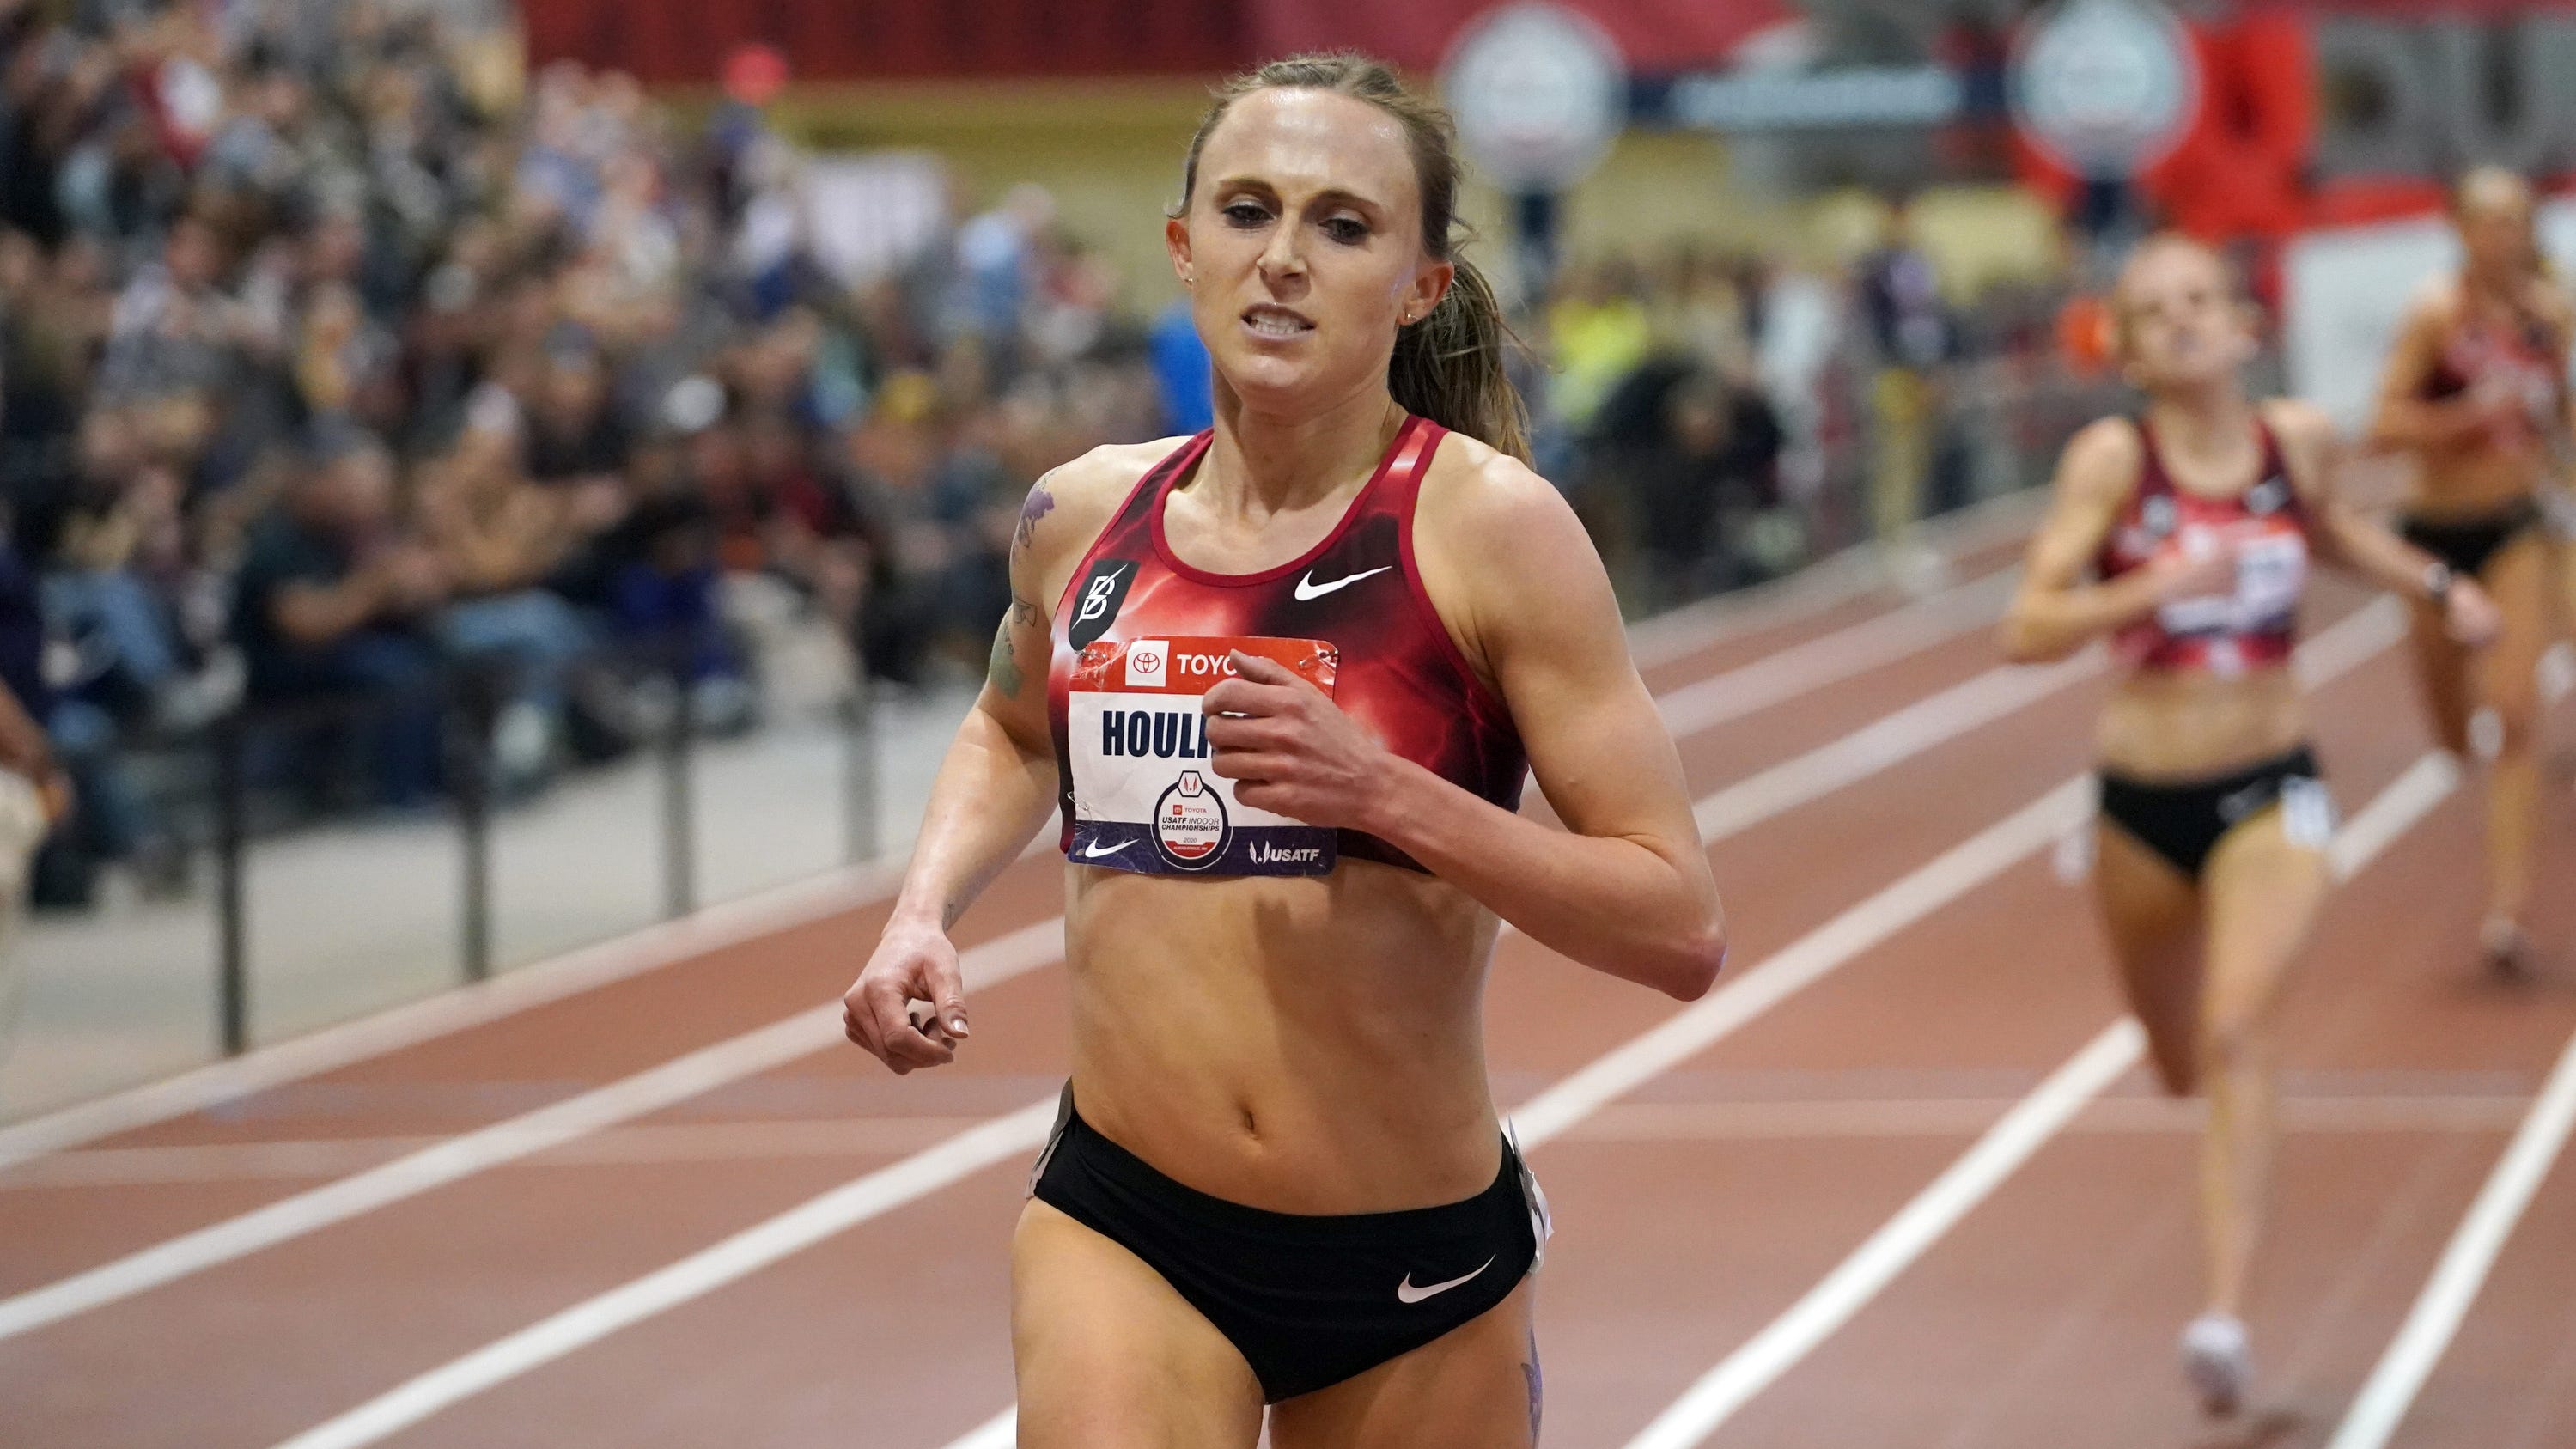 Record-setting American middle distance runner Shelby Houlihan tests positive for anabolic steroid